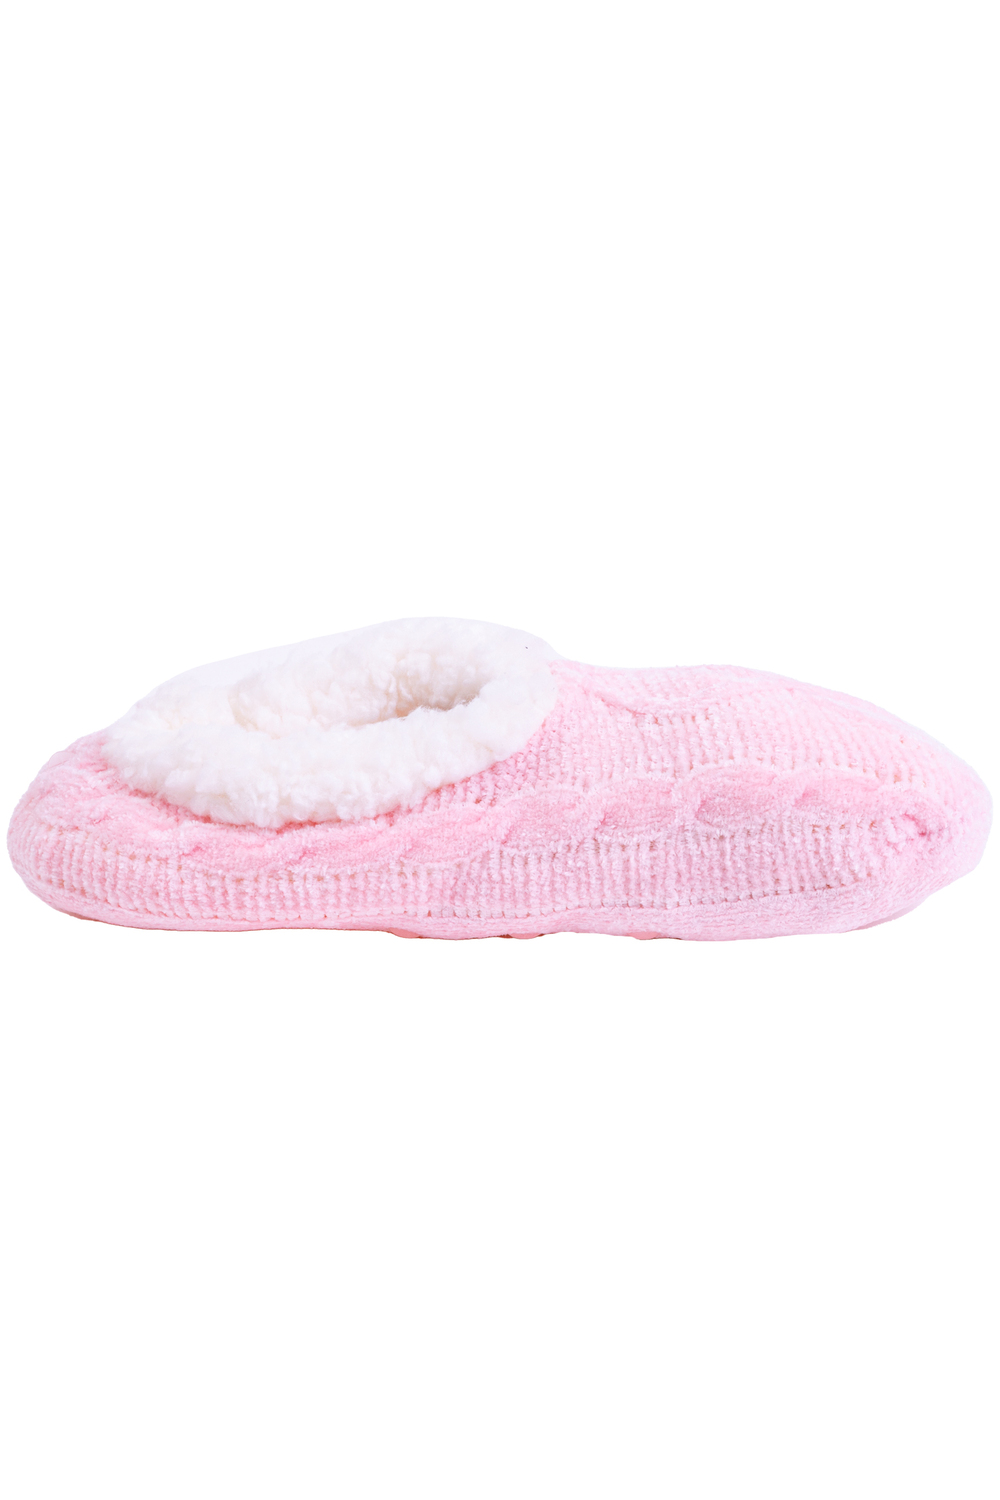 Knitted socks slippers with sherpa lining - Pink